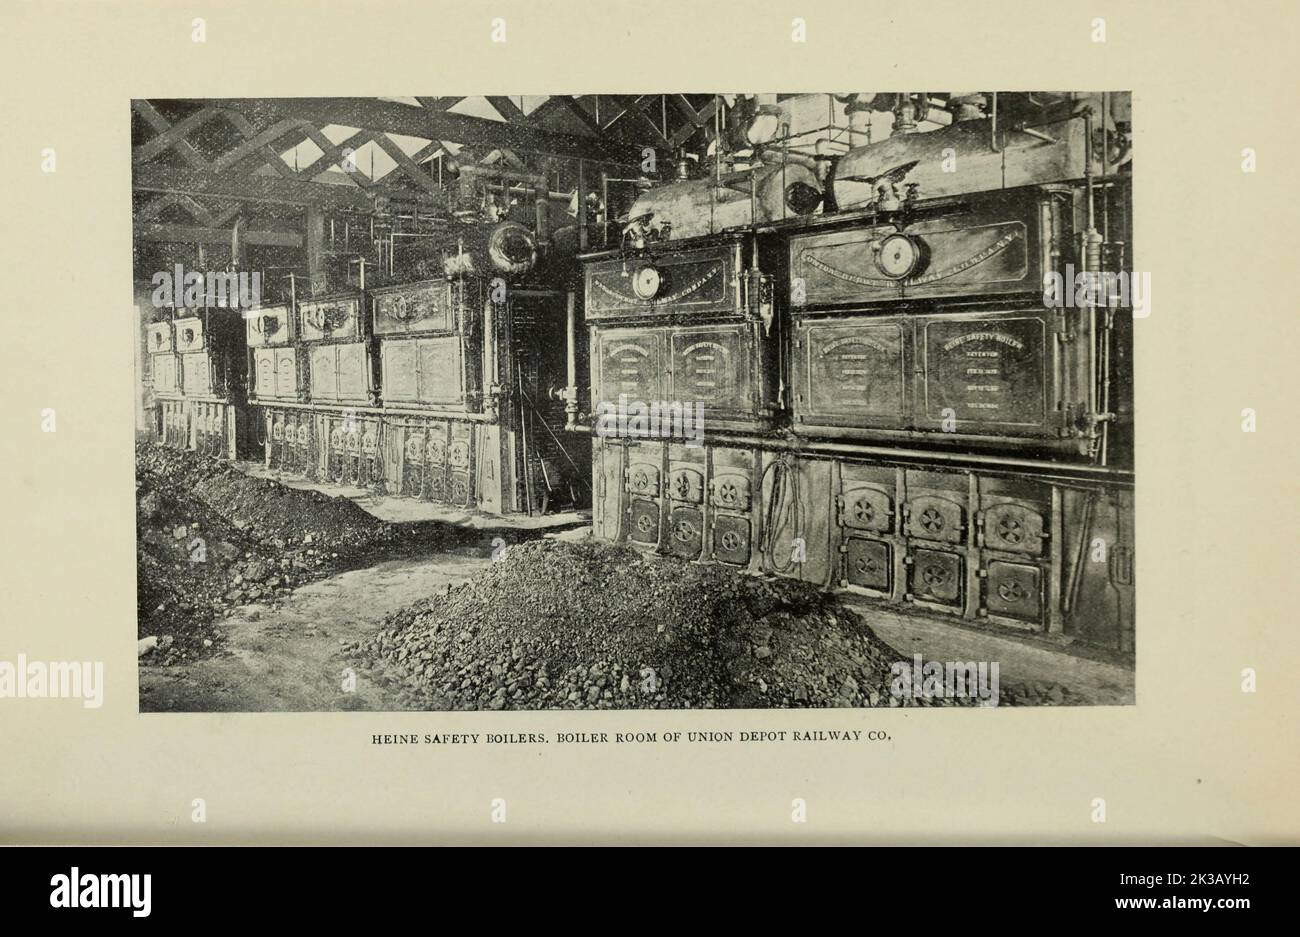 Heine Safety Boilers Boiler Room of Union Depot Railway Co. from the Article THE STREET RAILWAYS OF ST. LOUIS, Missouri By William H. Bryan, M. E. from The Engineering Magazine DEVOTED TO INDUSTRIAL PROGRESS Volume VIII April to September, 1895 NEW YORK The Engineering Magazine Co Stock Photo